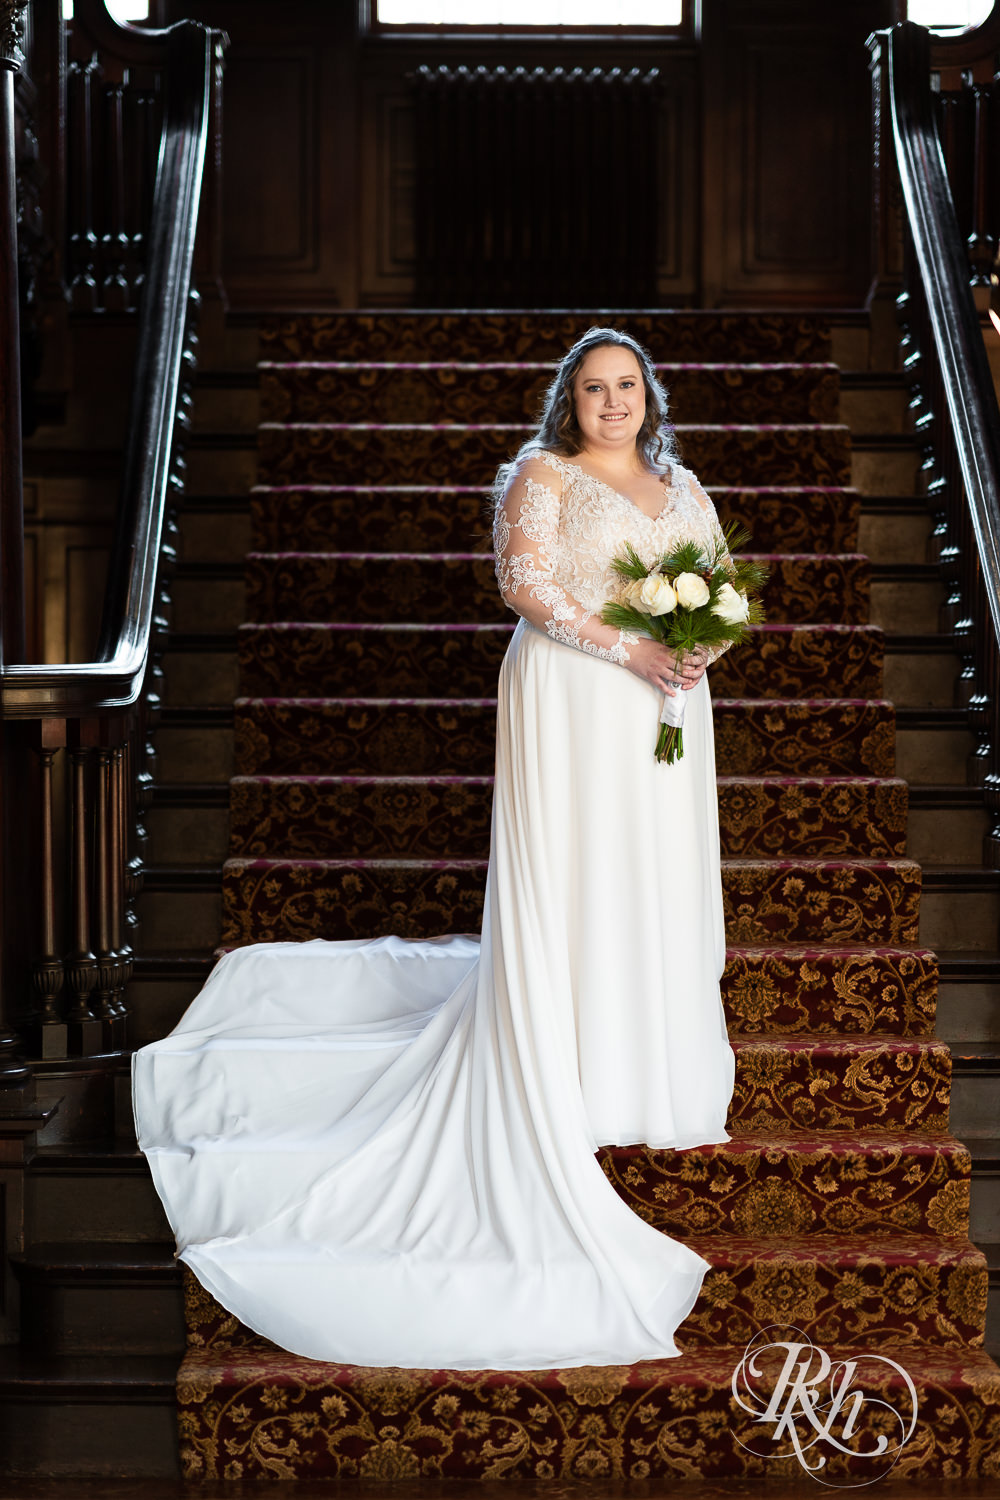 Bride holding flowers standing on grand staircase at Semple Mansion in Minneapolis, Minnesota.